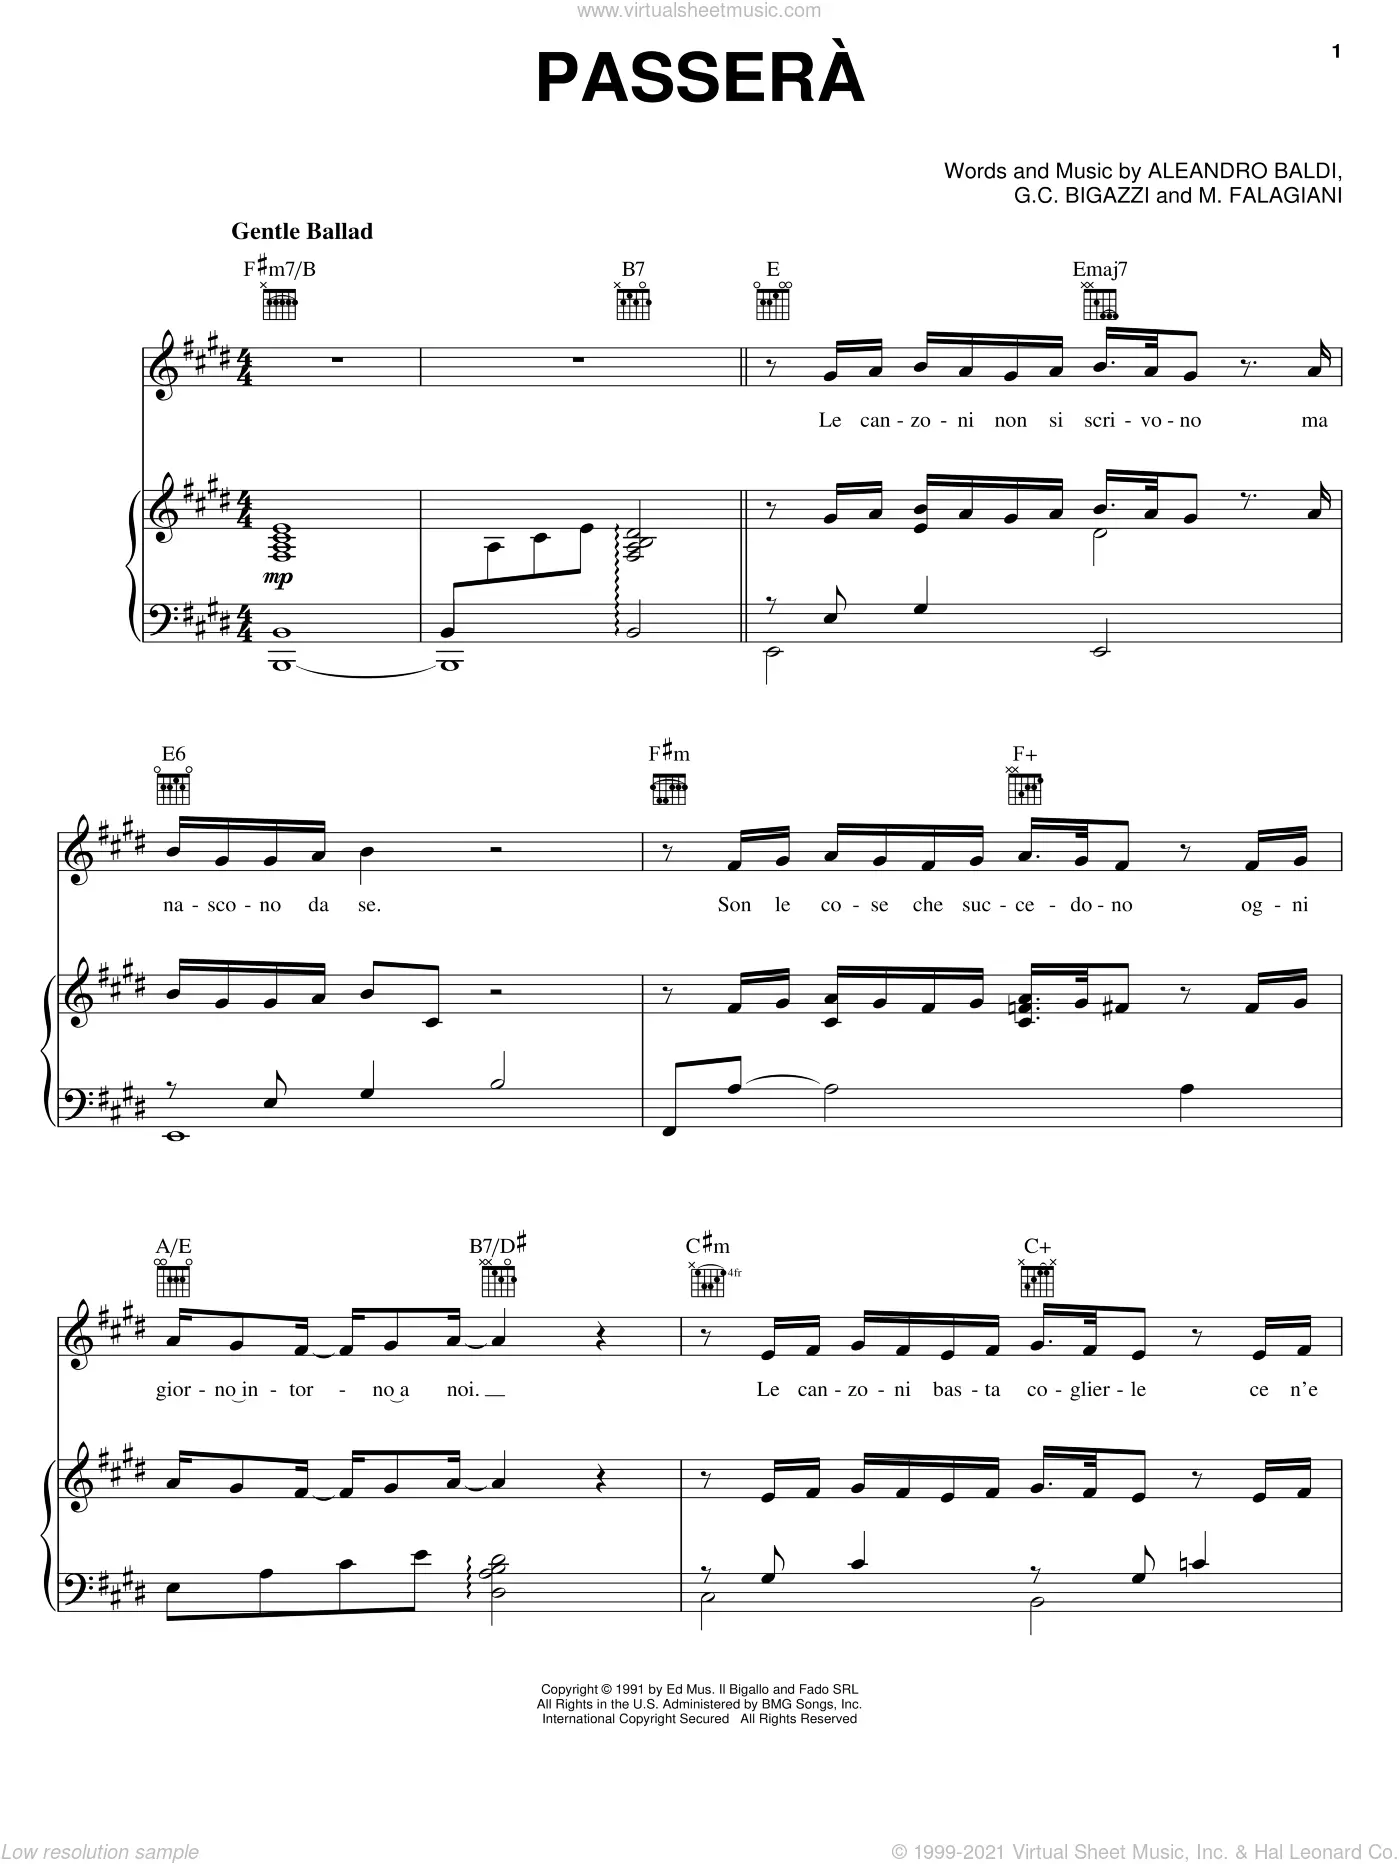 Pour Que Tu M Aime Encore Tab Download Digital Sheet Music of il divo for Piano, Vocal and Guitar